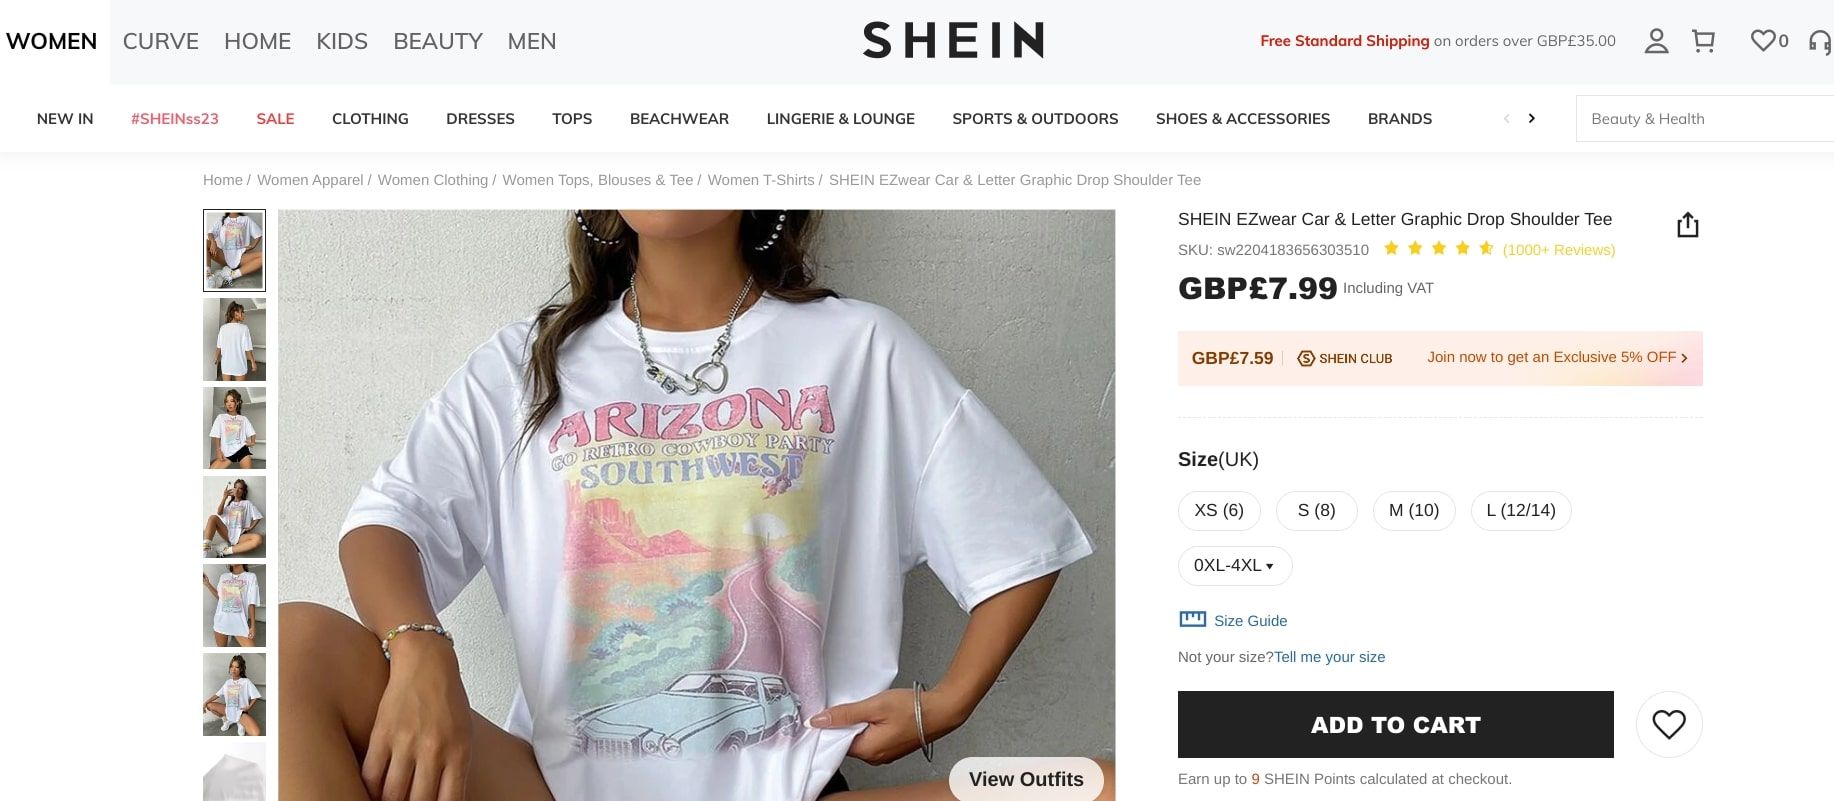 Is the 90% Off SHEIN Women's Clothing Clearance on Facebook Legit or a Scam?